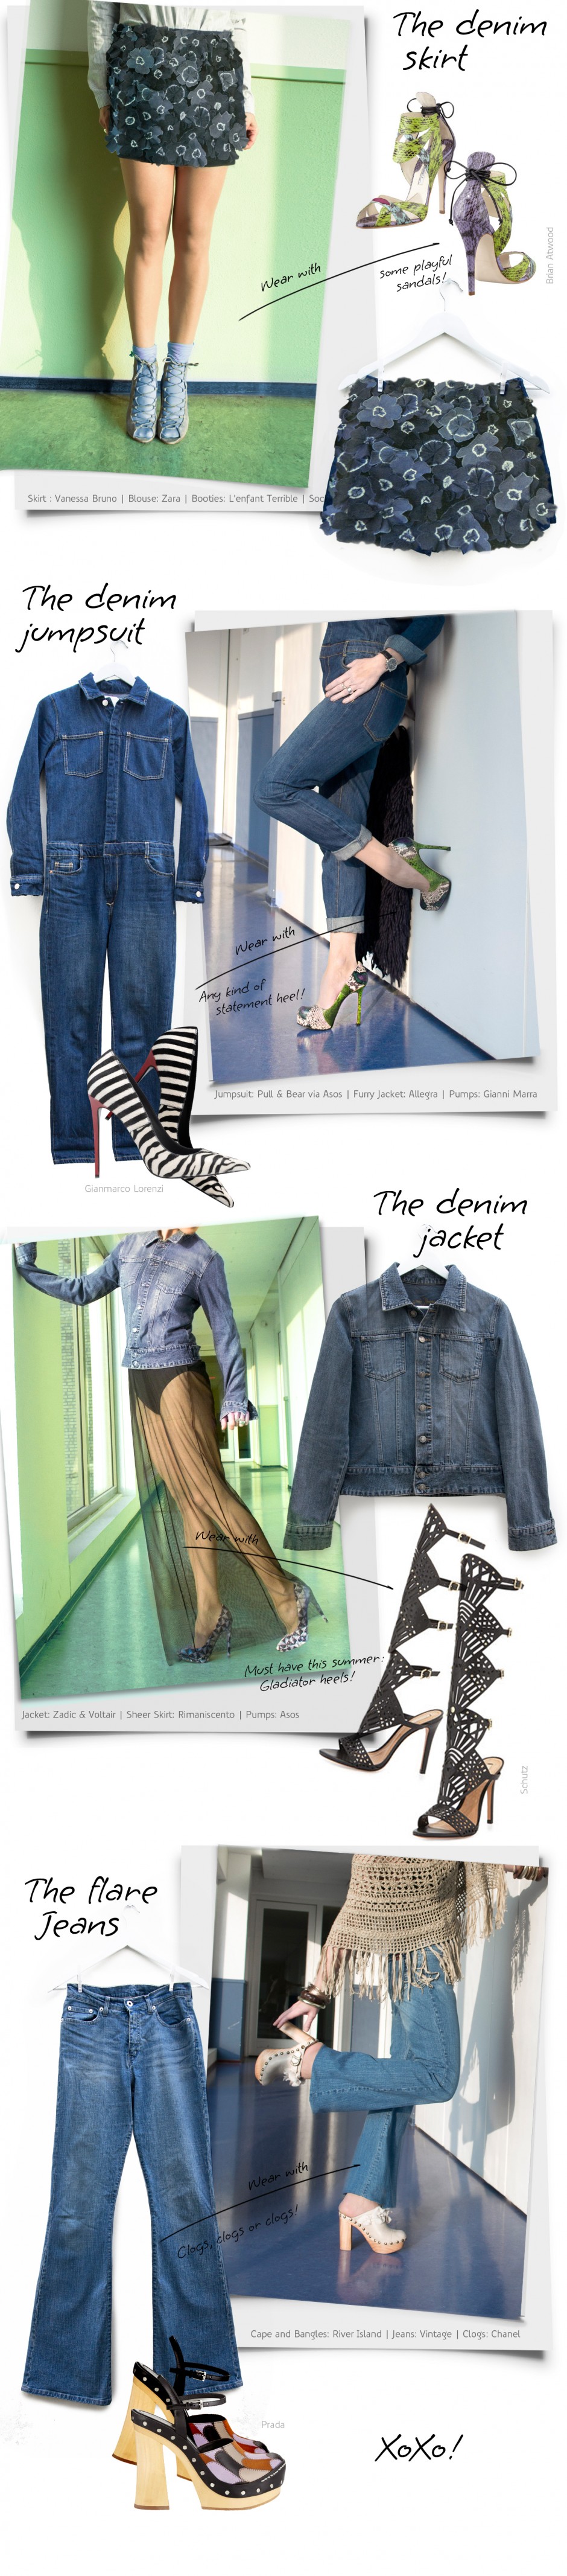 How to: THE DENIM GUIDE